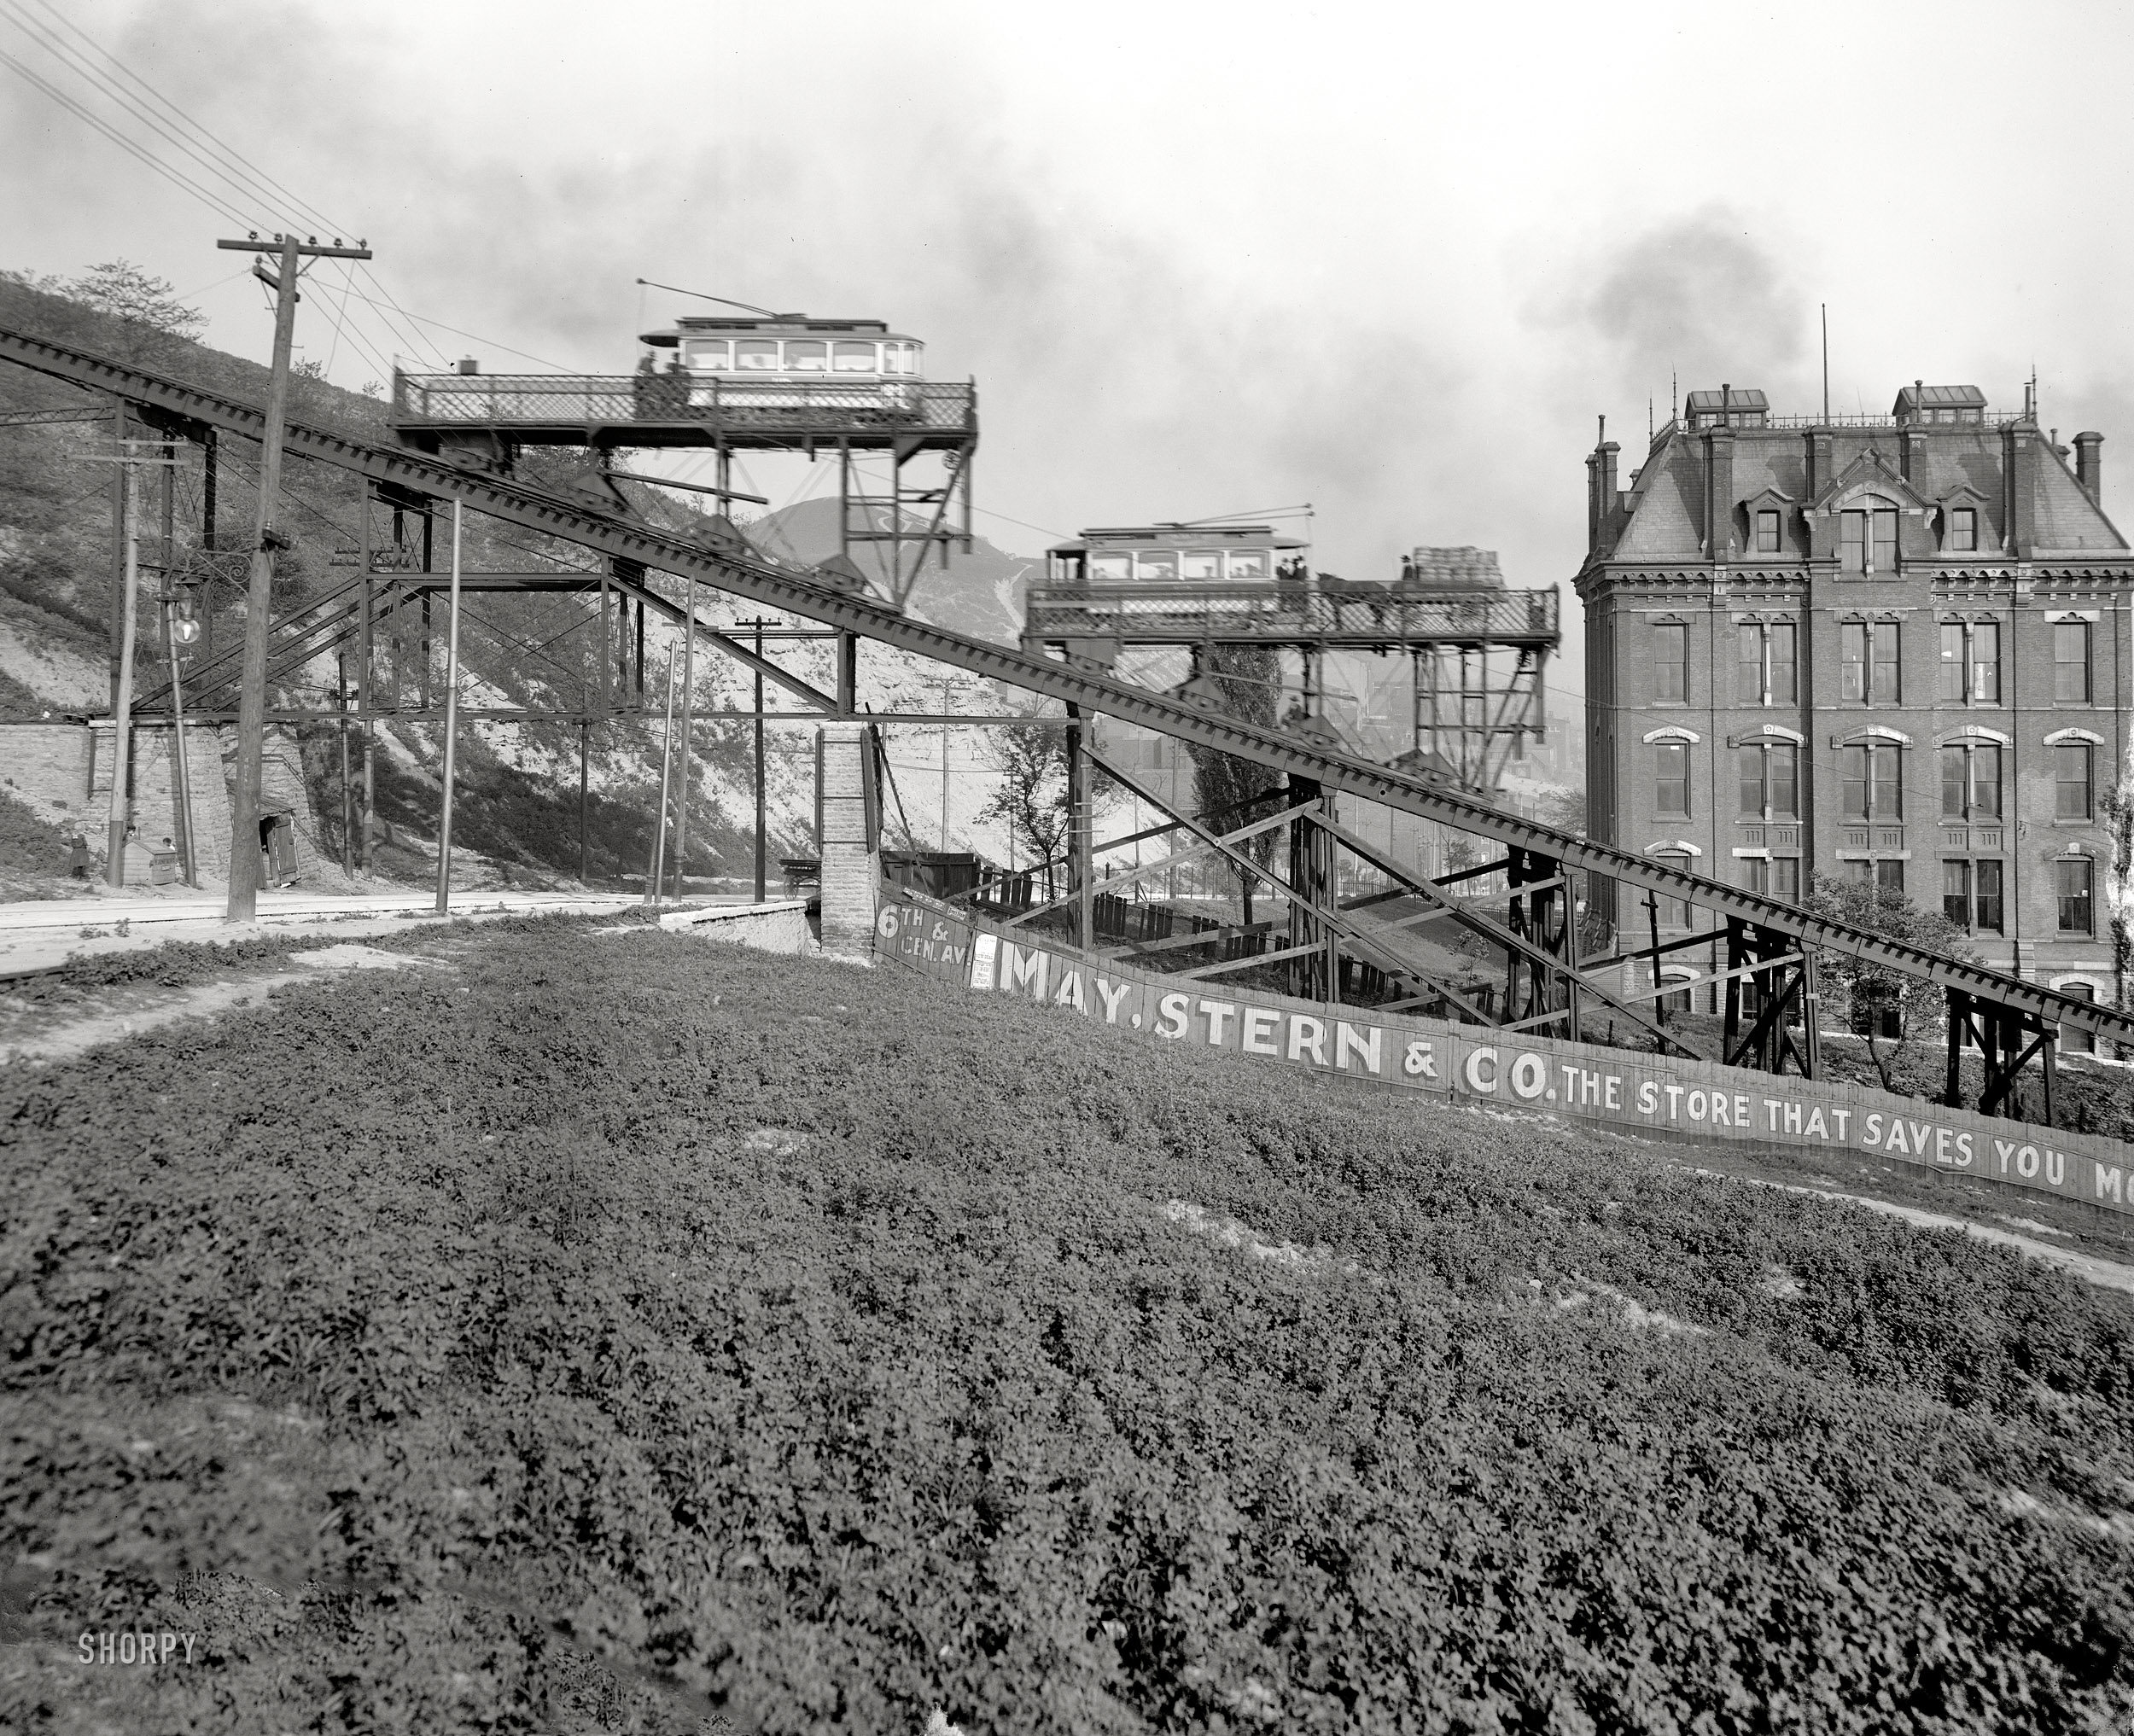 Cincinnati, Ohio, circa 1905. "Up the hill by trolley." On one of the city's famous incline railways. Detroit Publishing Company glass negative. View full size.